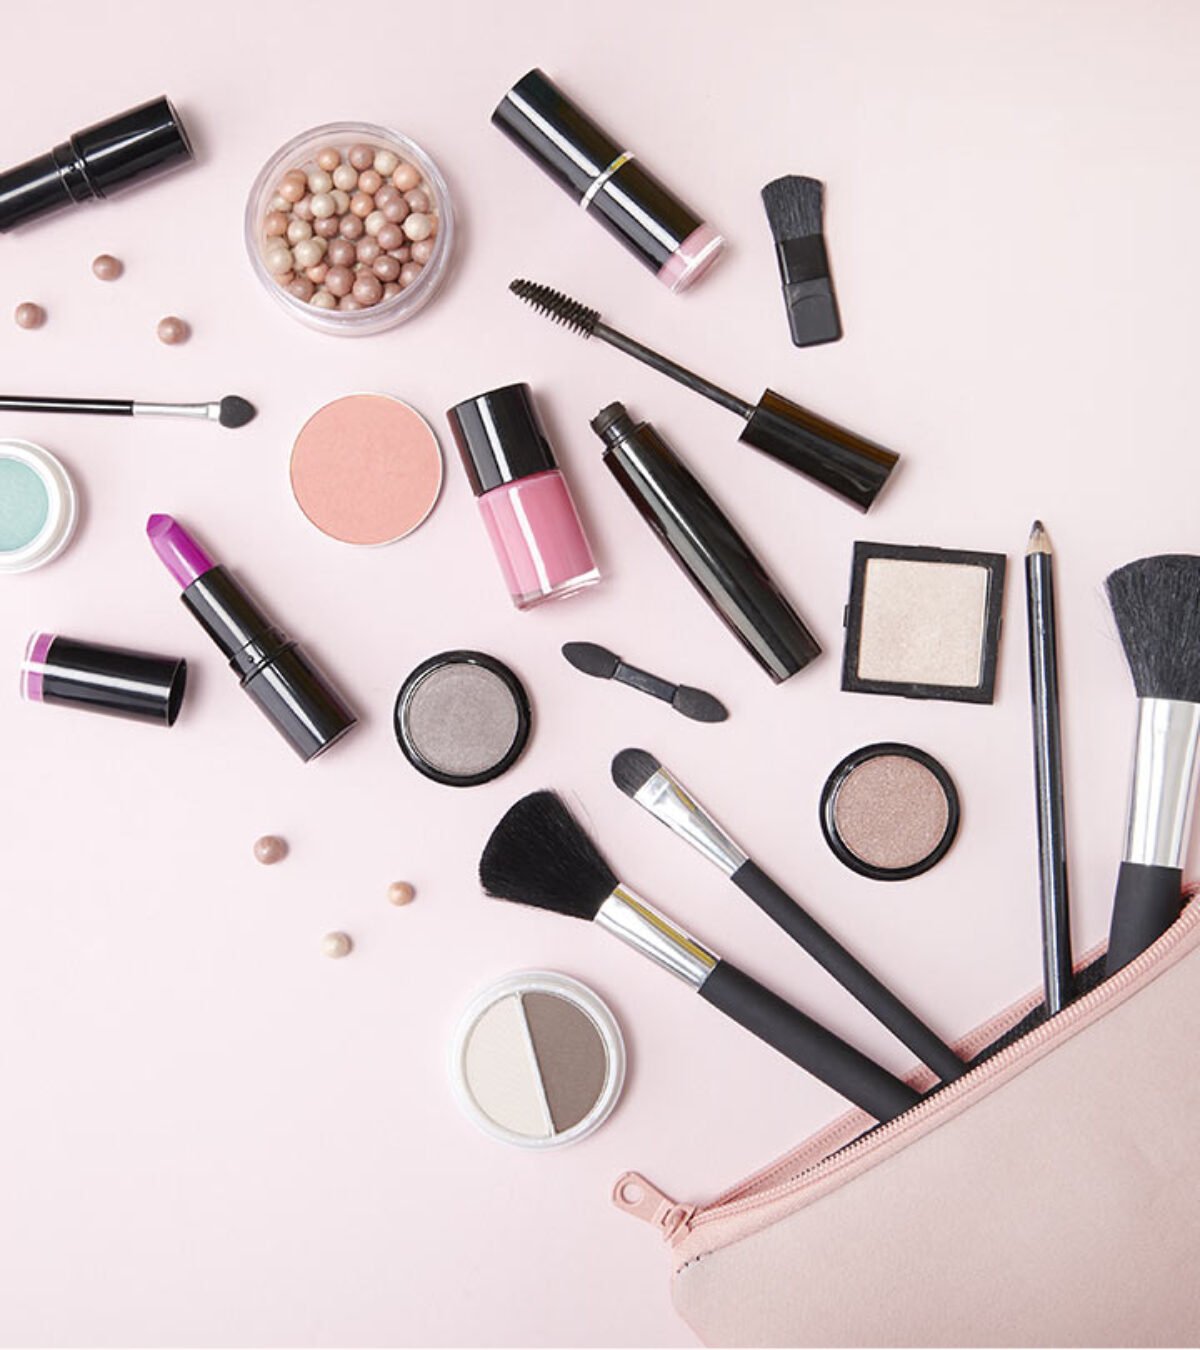 These Popular Makeup And Beauty Brands In Pakistan Are Not Halal